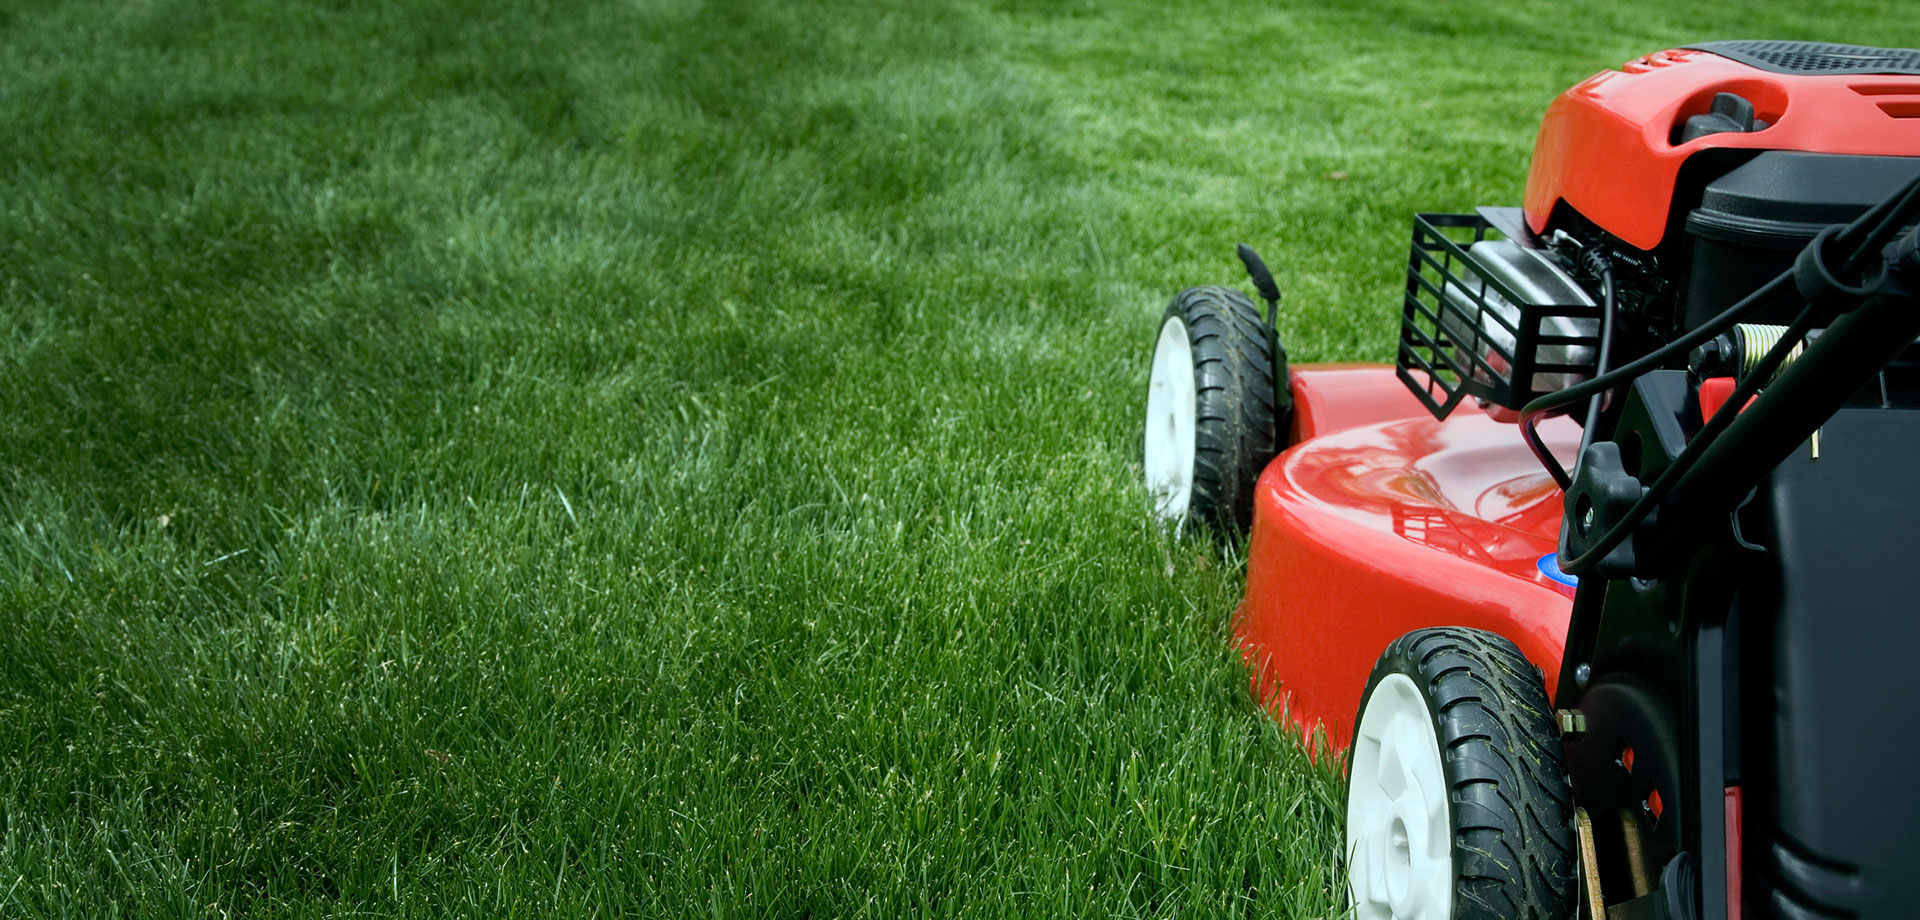 Full Range of Lawn & Landscaping Services